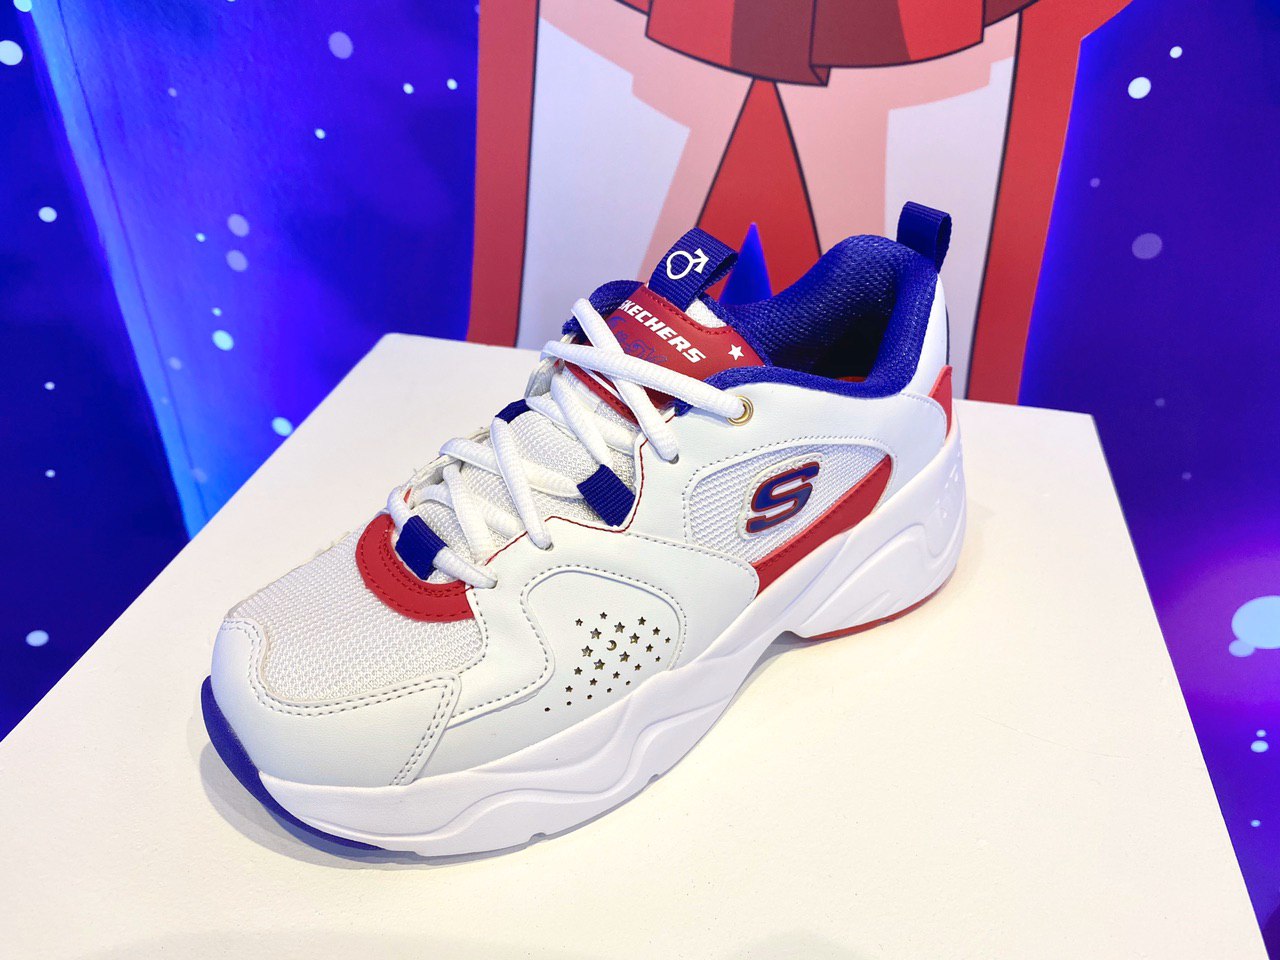 Skechers x Sailormoon sneakers & apparel now available in S'pore S$39 - - Mothership.SG - News from Singapore, Asia and around the